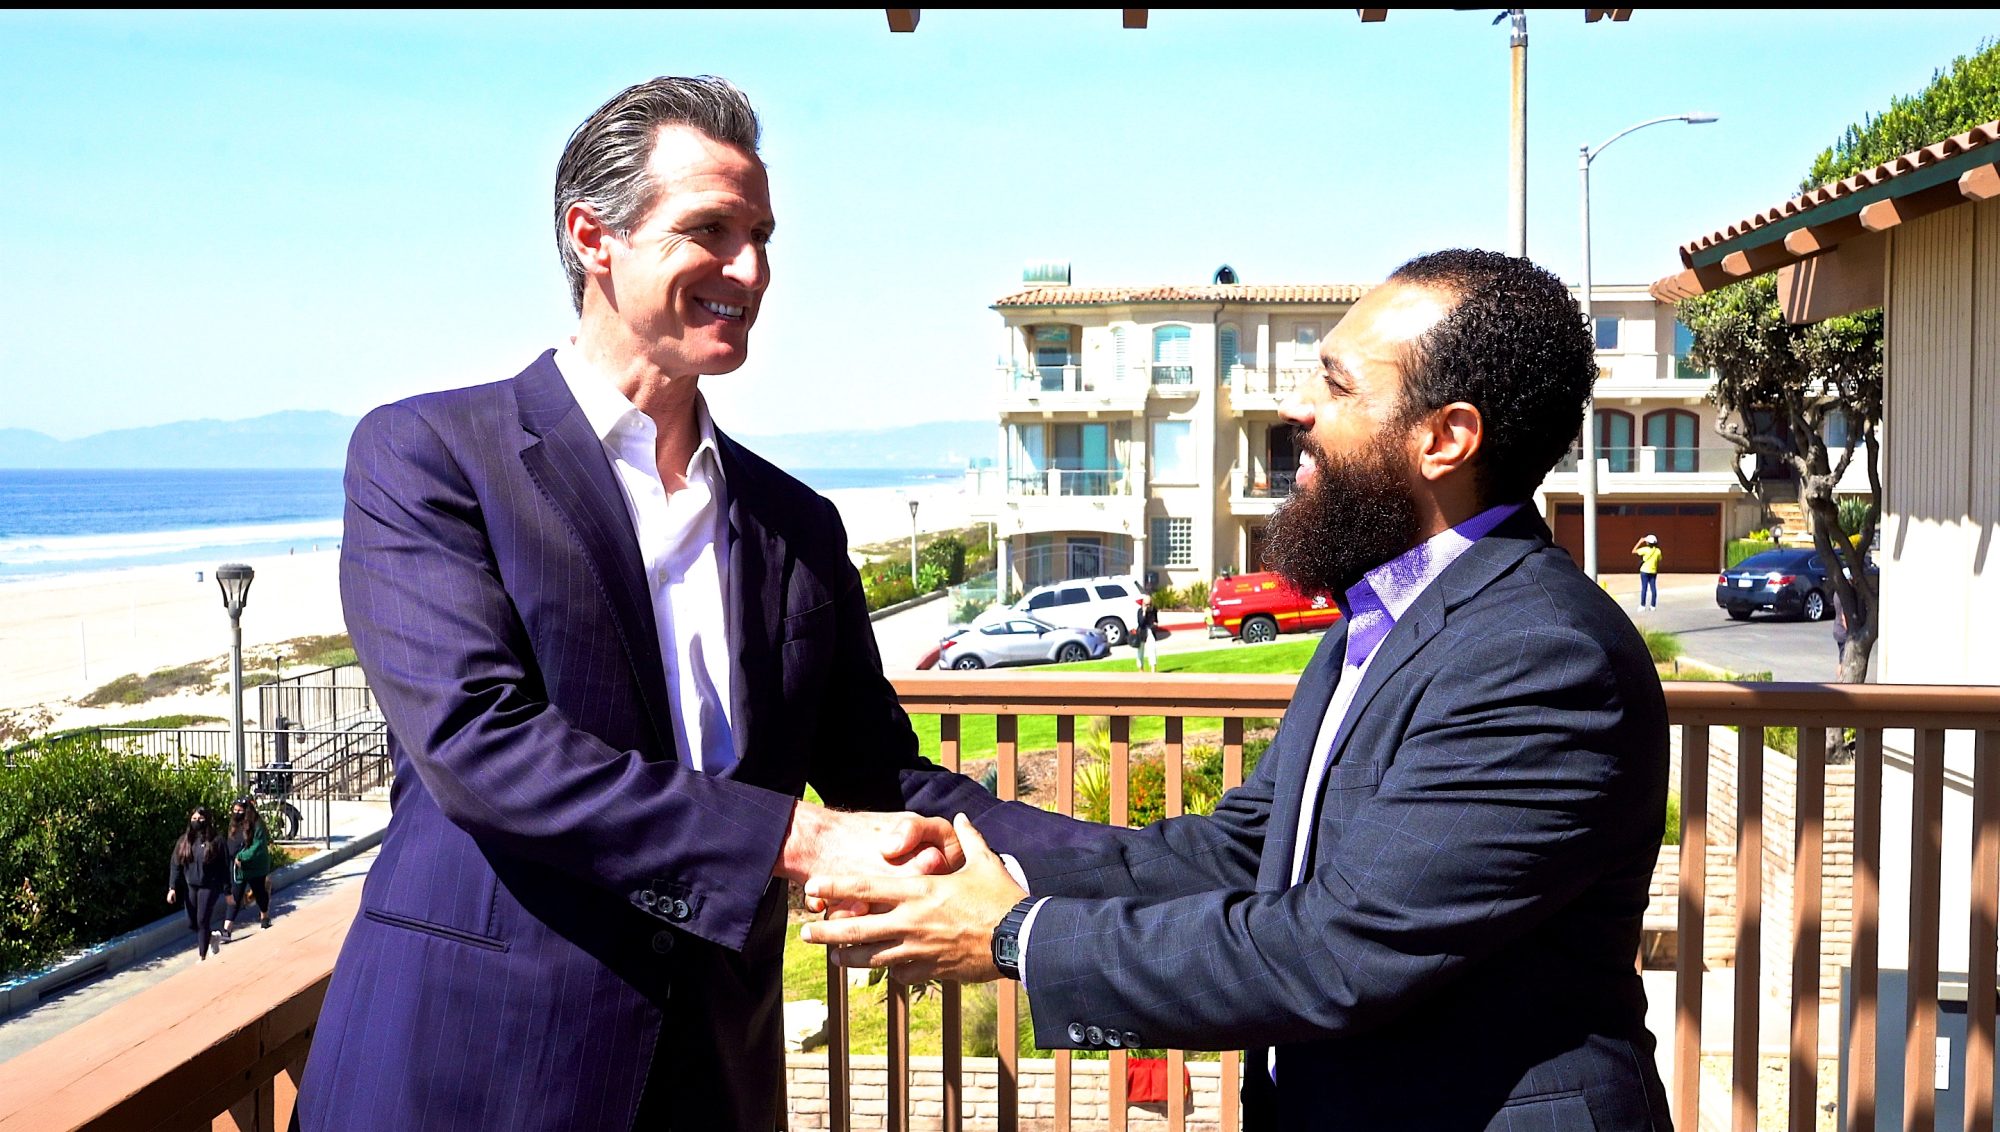 California Governor Gavin Newsom greets Los Angeles Sentinel Managing Editor Brandon I. Brooks for the exclusive one-on-one interview. (E. Mesiyah McGinnis/L.A. Sentinel)